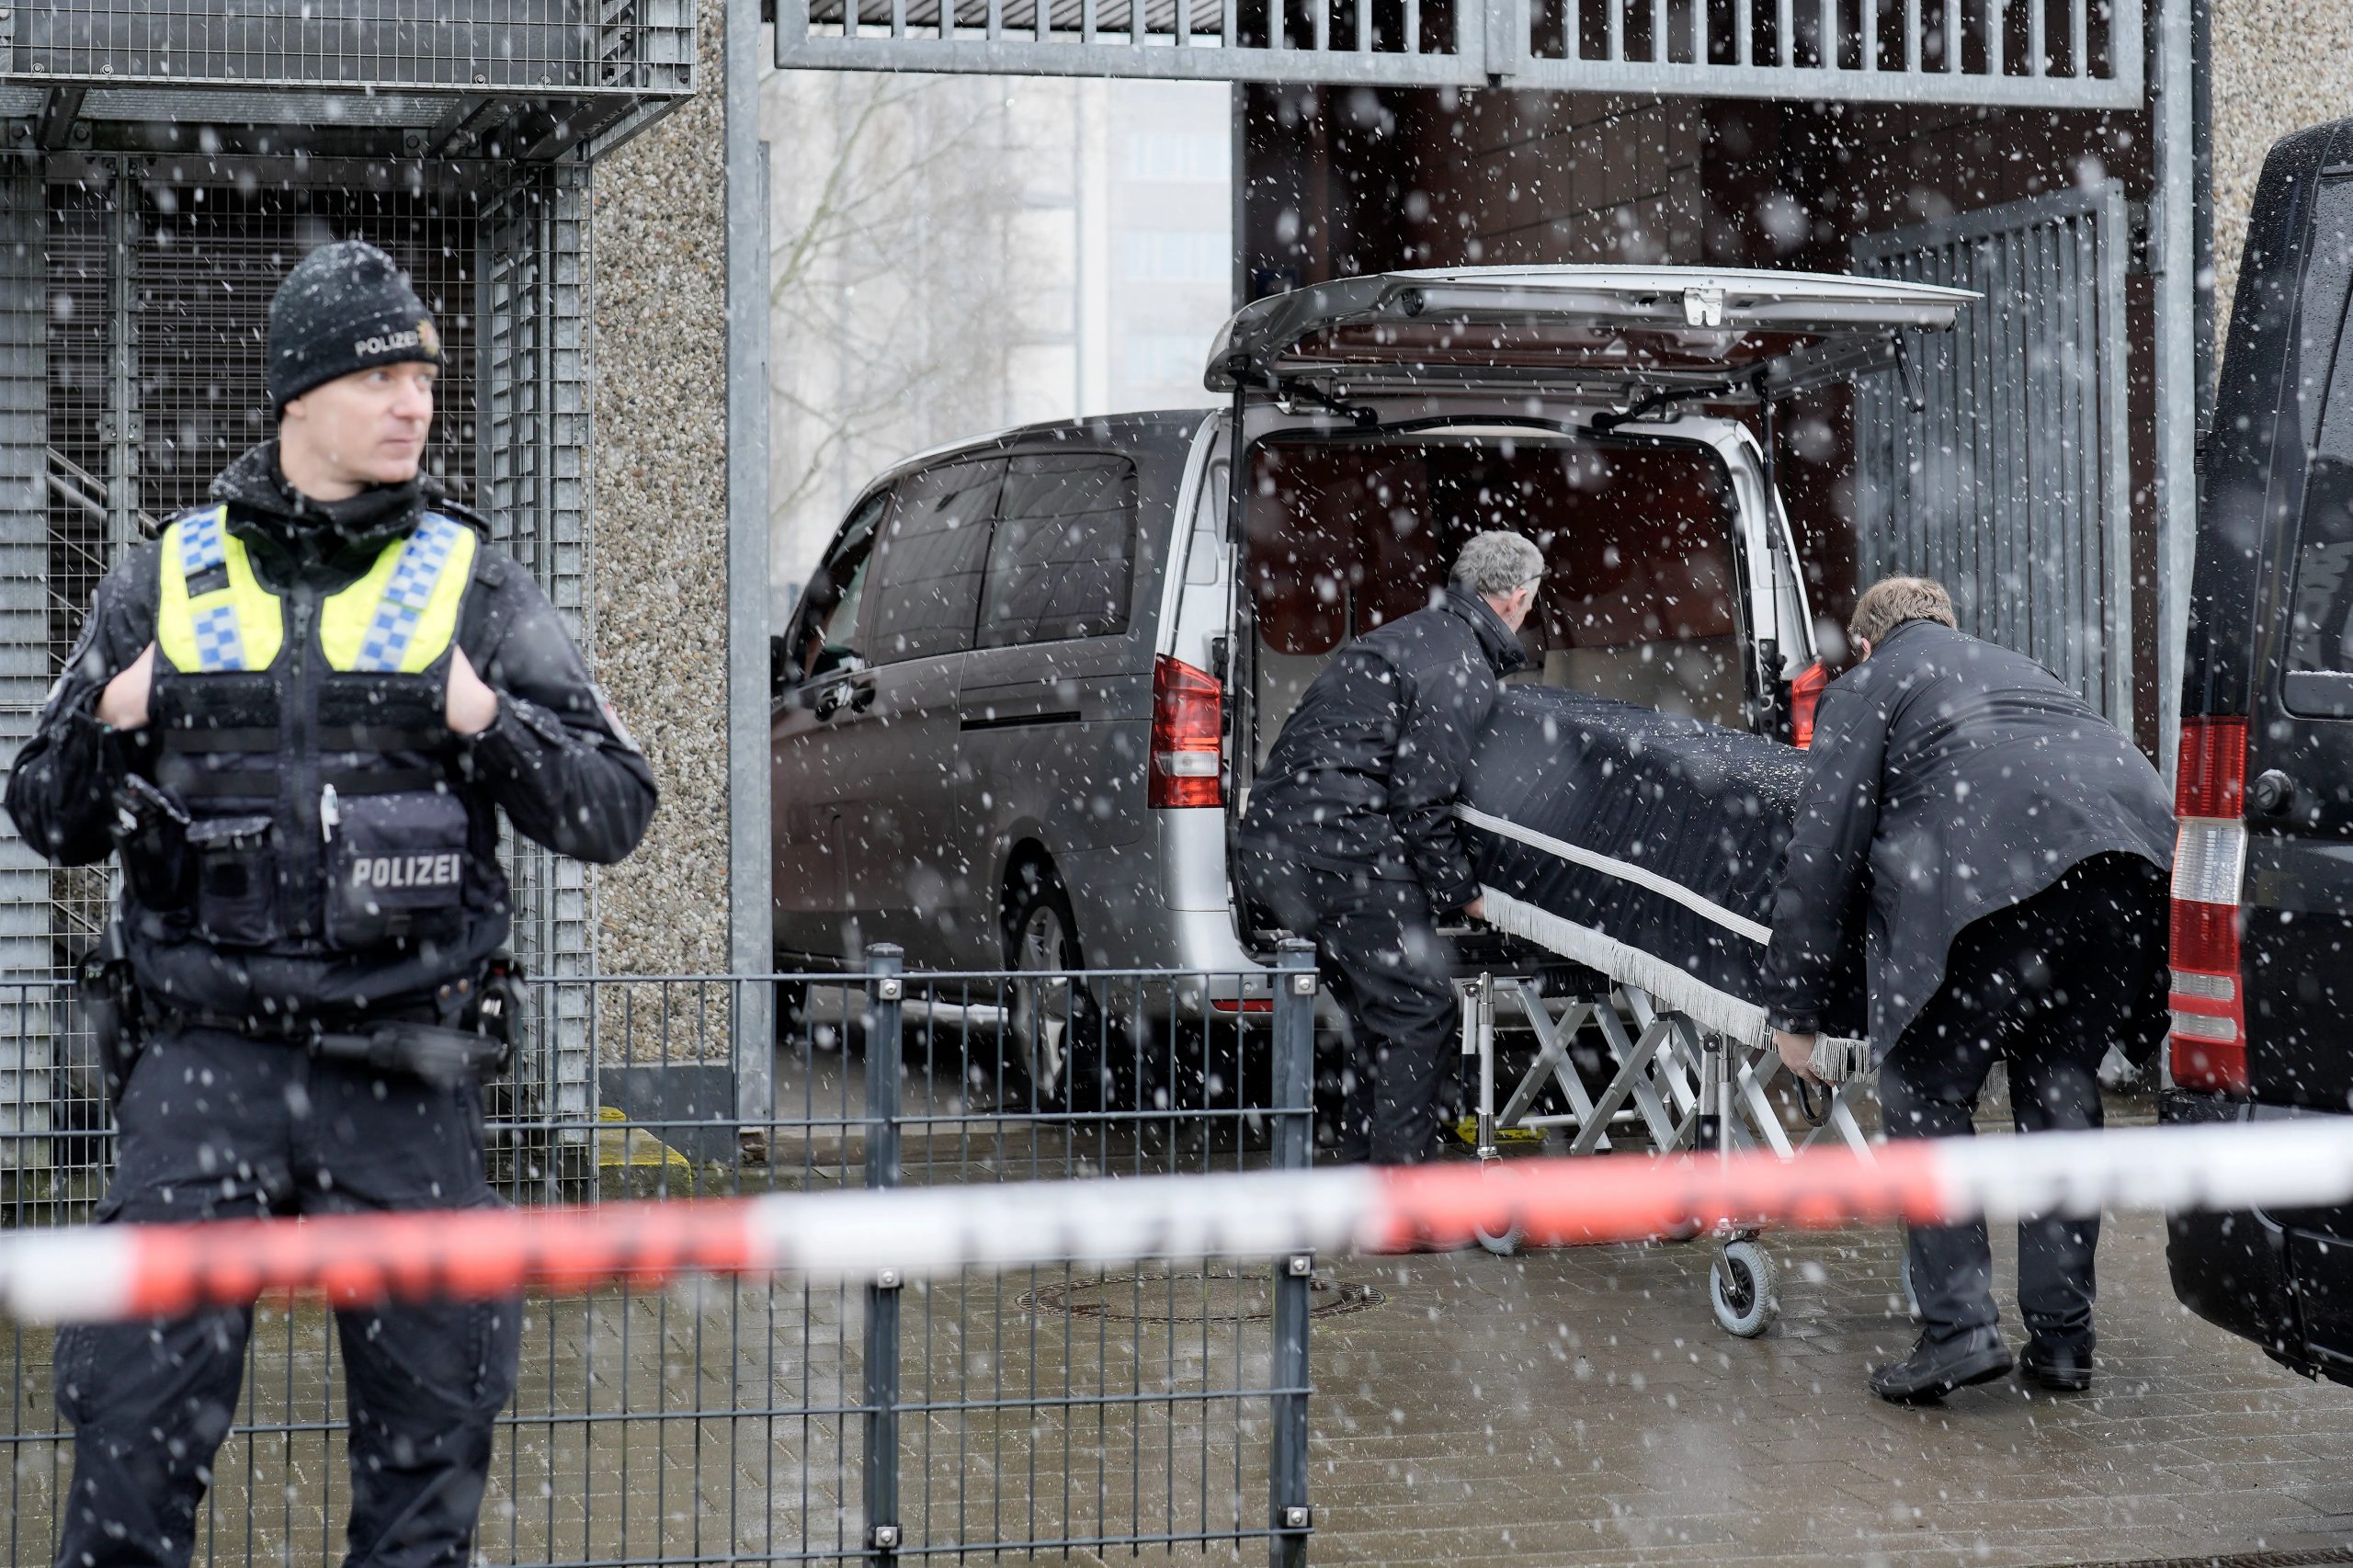 German shooting: 7 dead including one unborn child at Jehovah’s Witness meeting